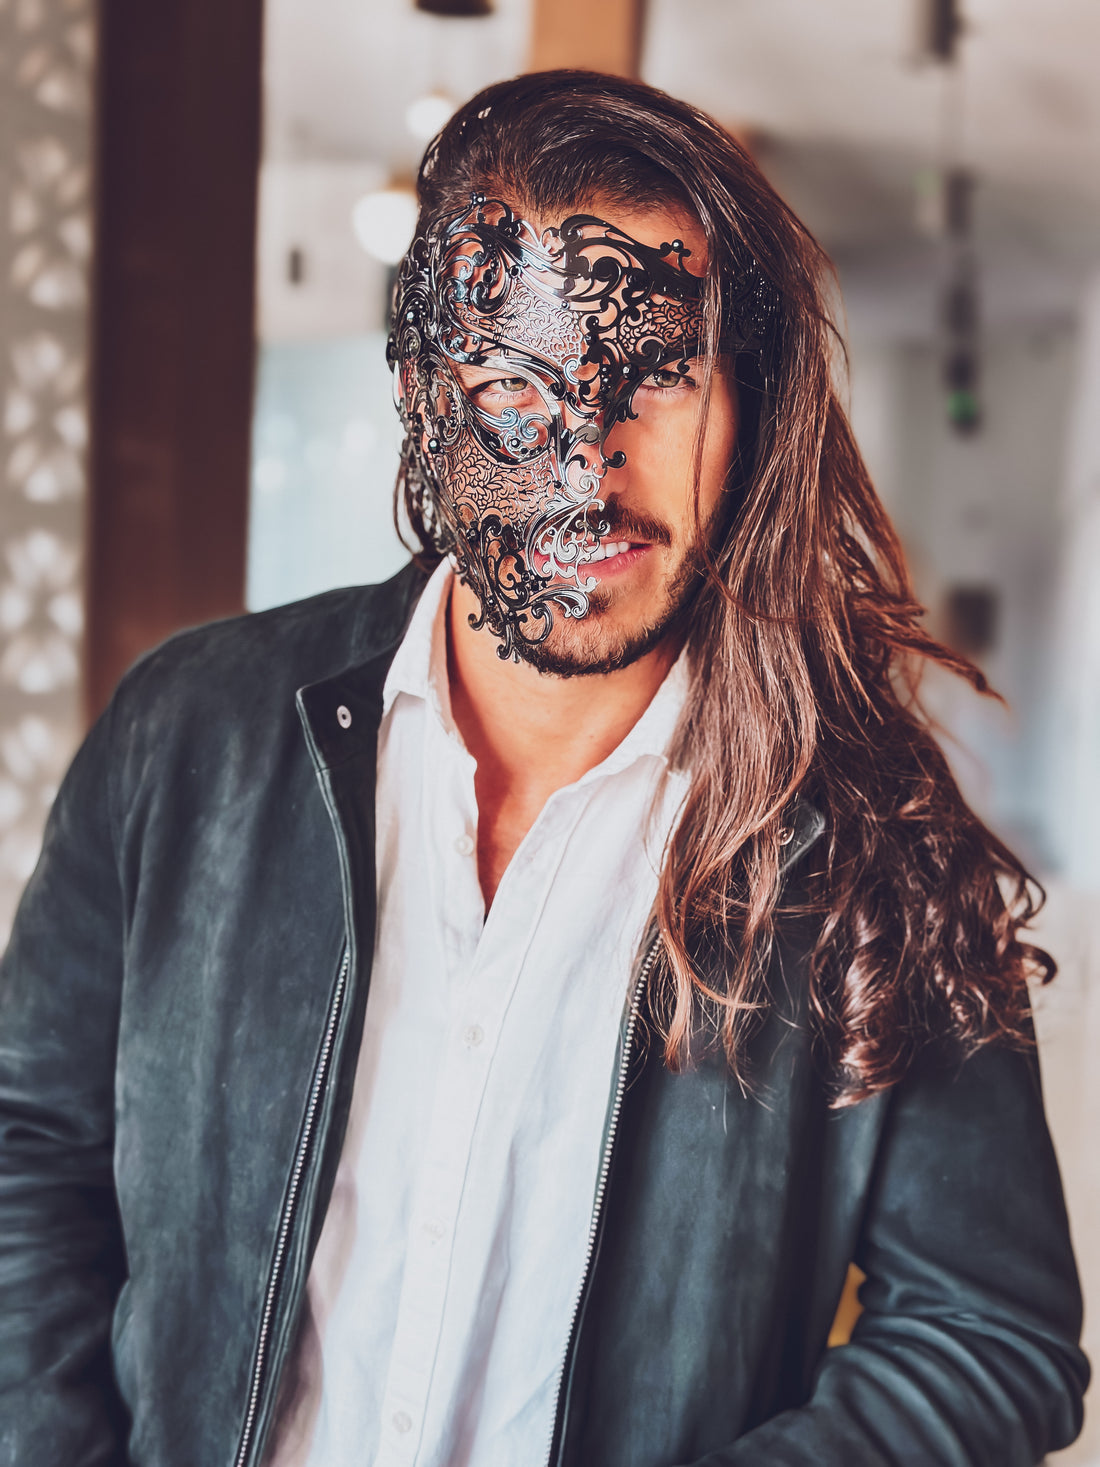 Masquerade Masks for Men: An Elevated Look for Any Event